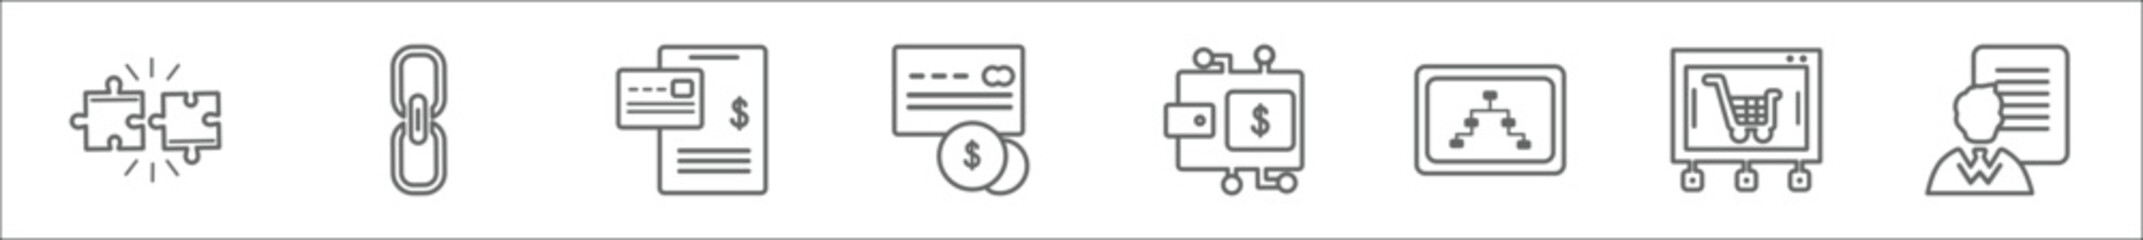 outline set of general line icons. linear vector icons such as compatibility, chain, credit report, annual fee, digital economy, information architecture, ecommerce platform, agent script